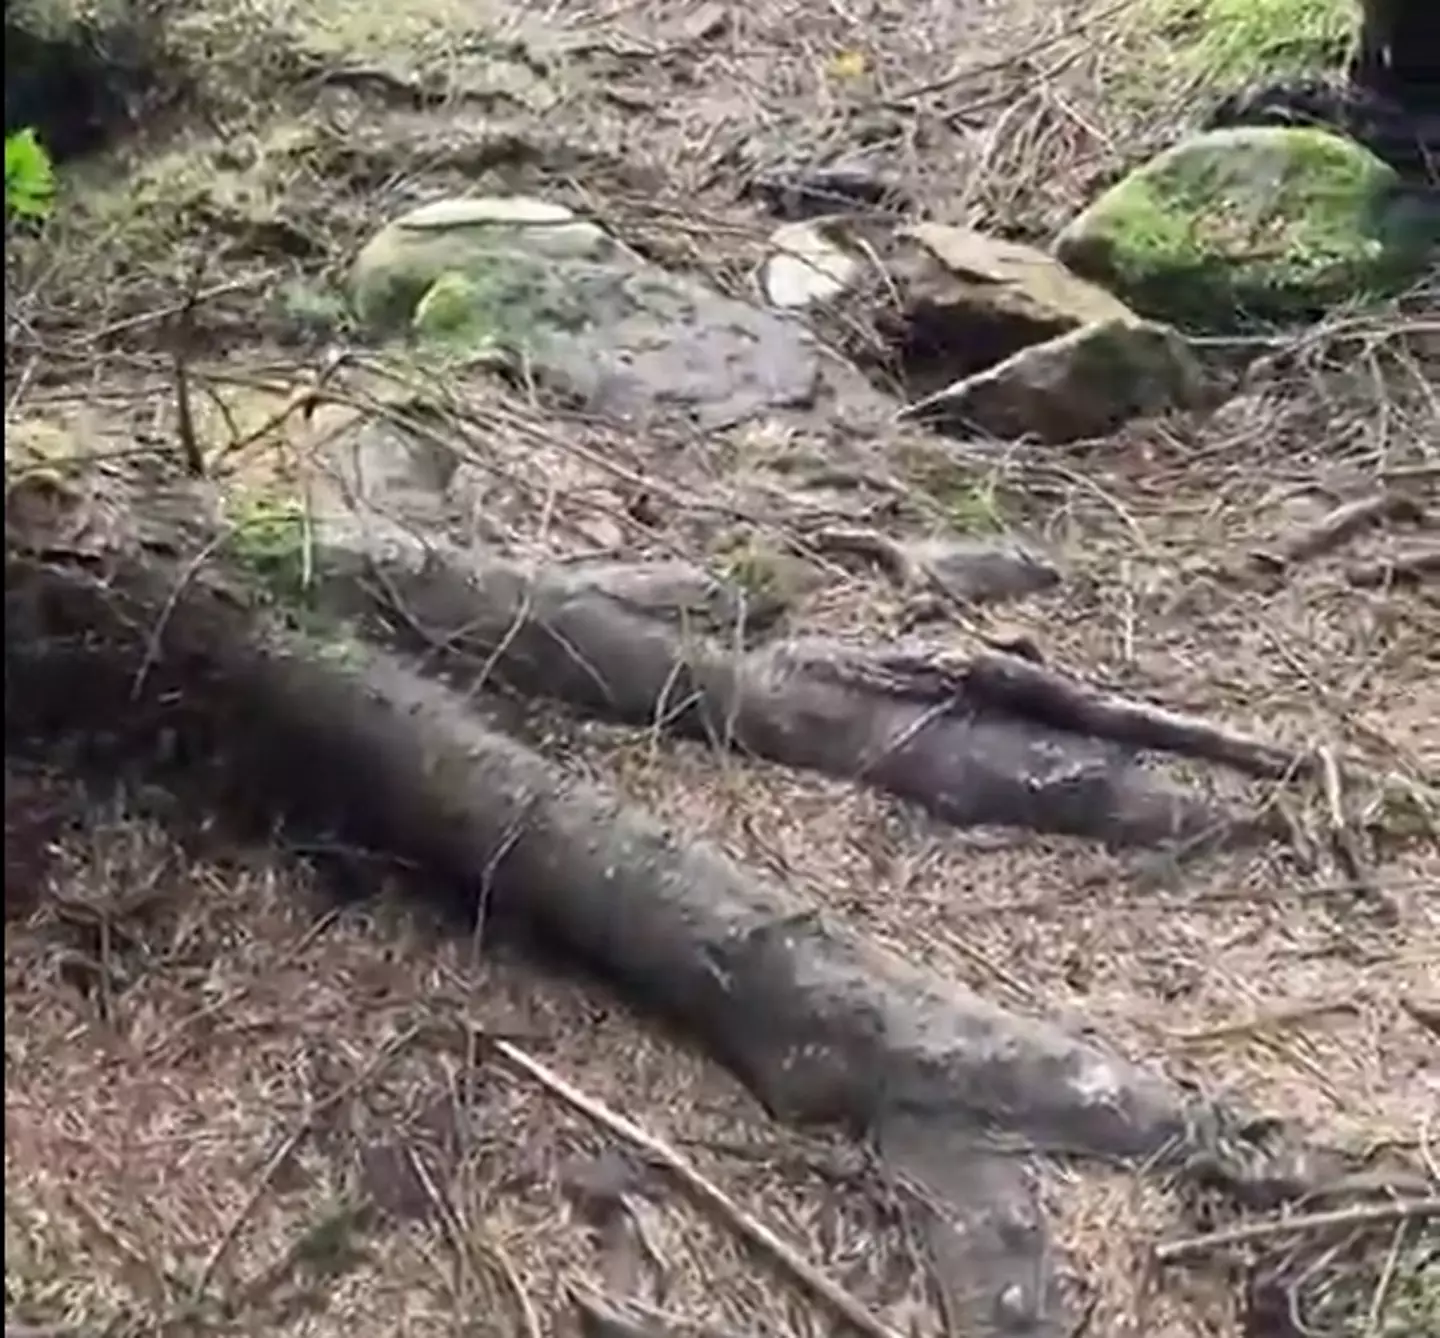 As the tree sinks back down so does the ground around it. Honestly, it's much more eerie if you watch the video.